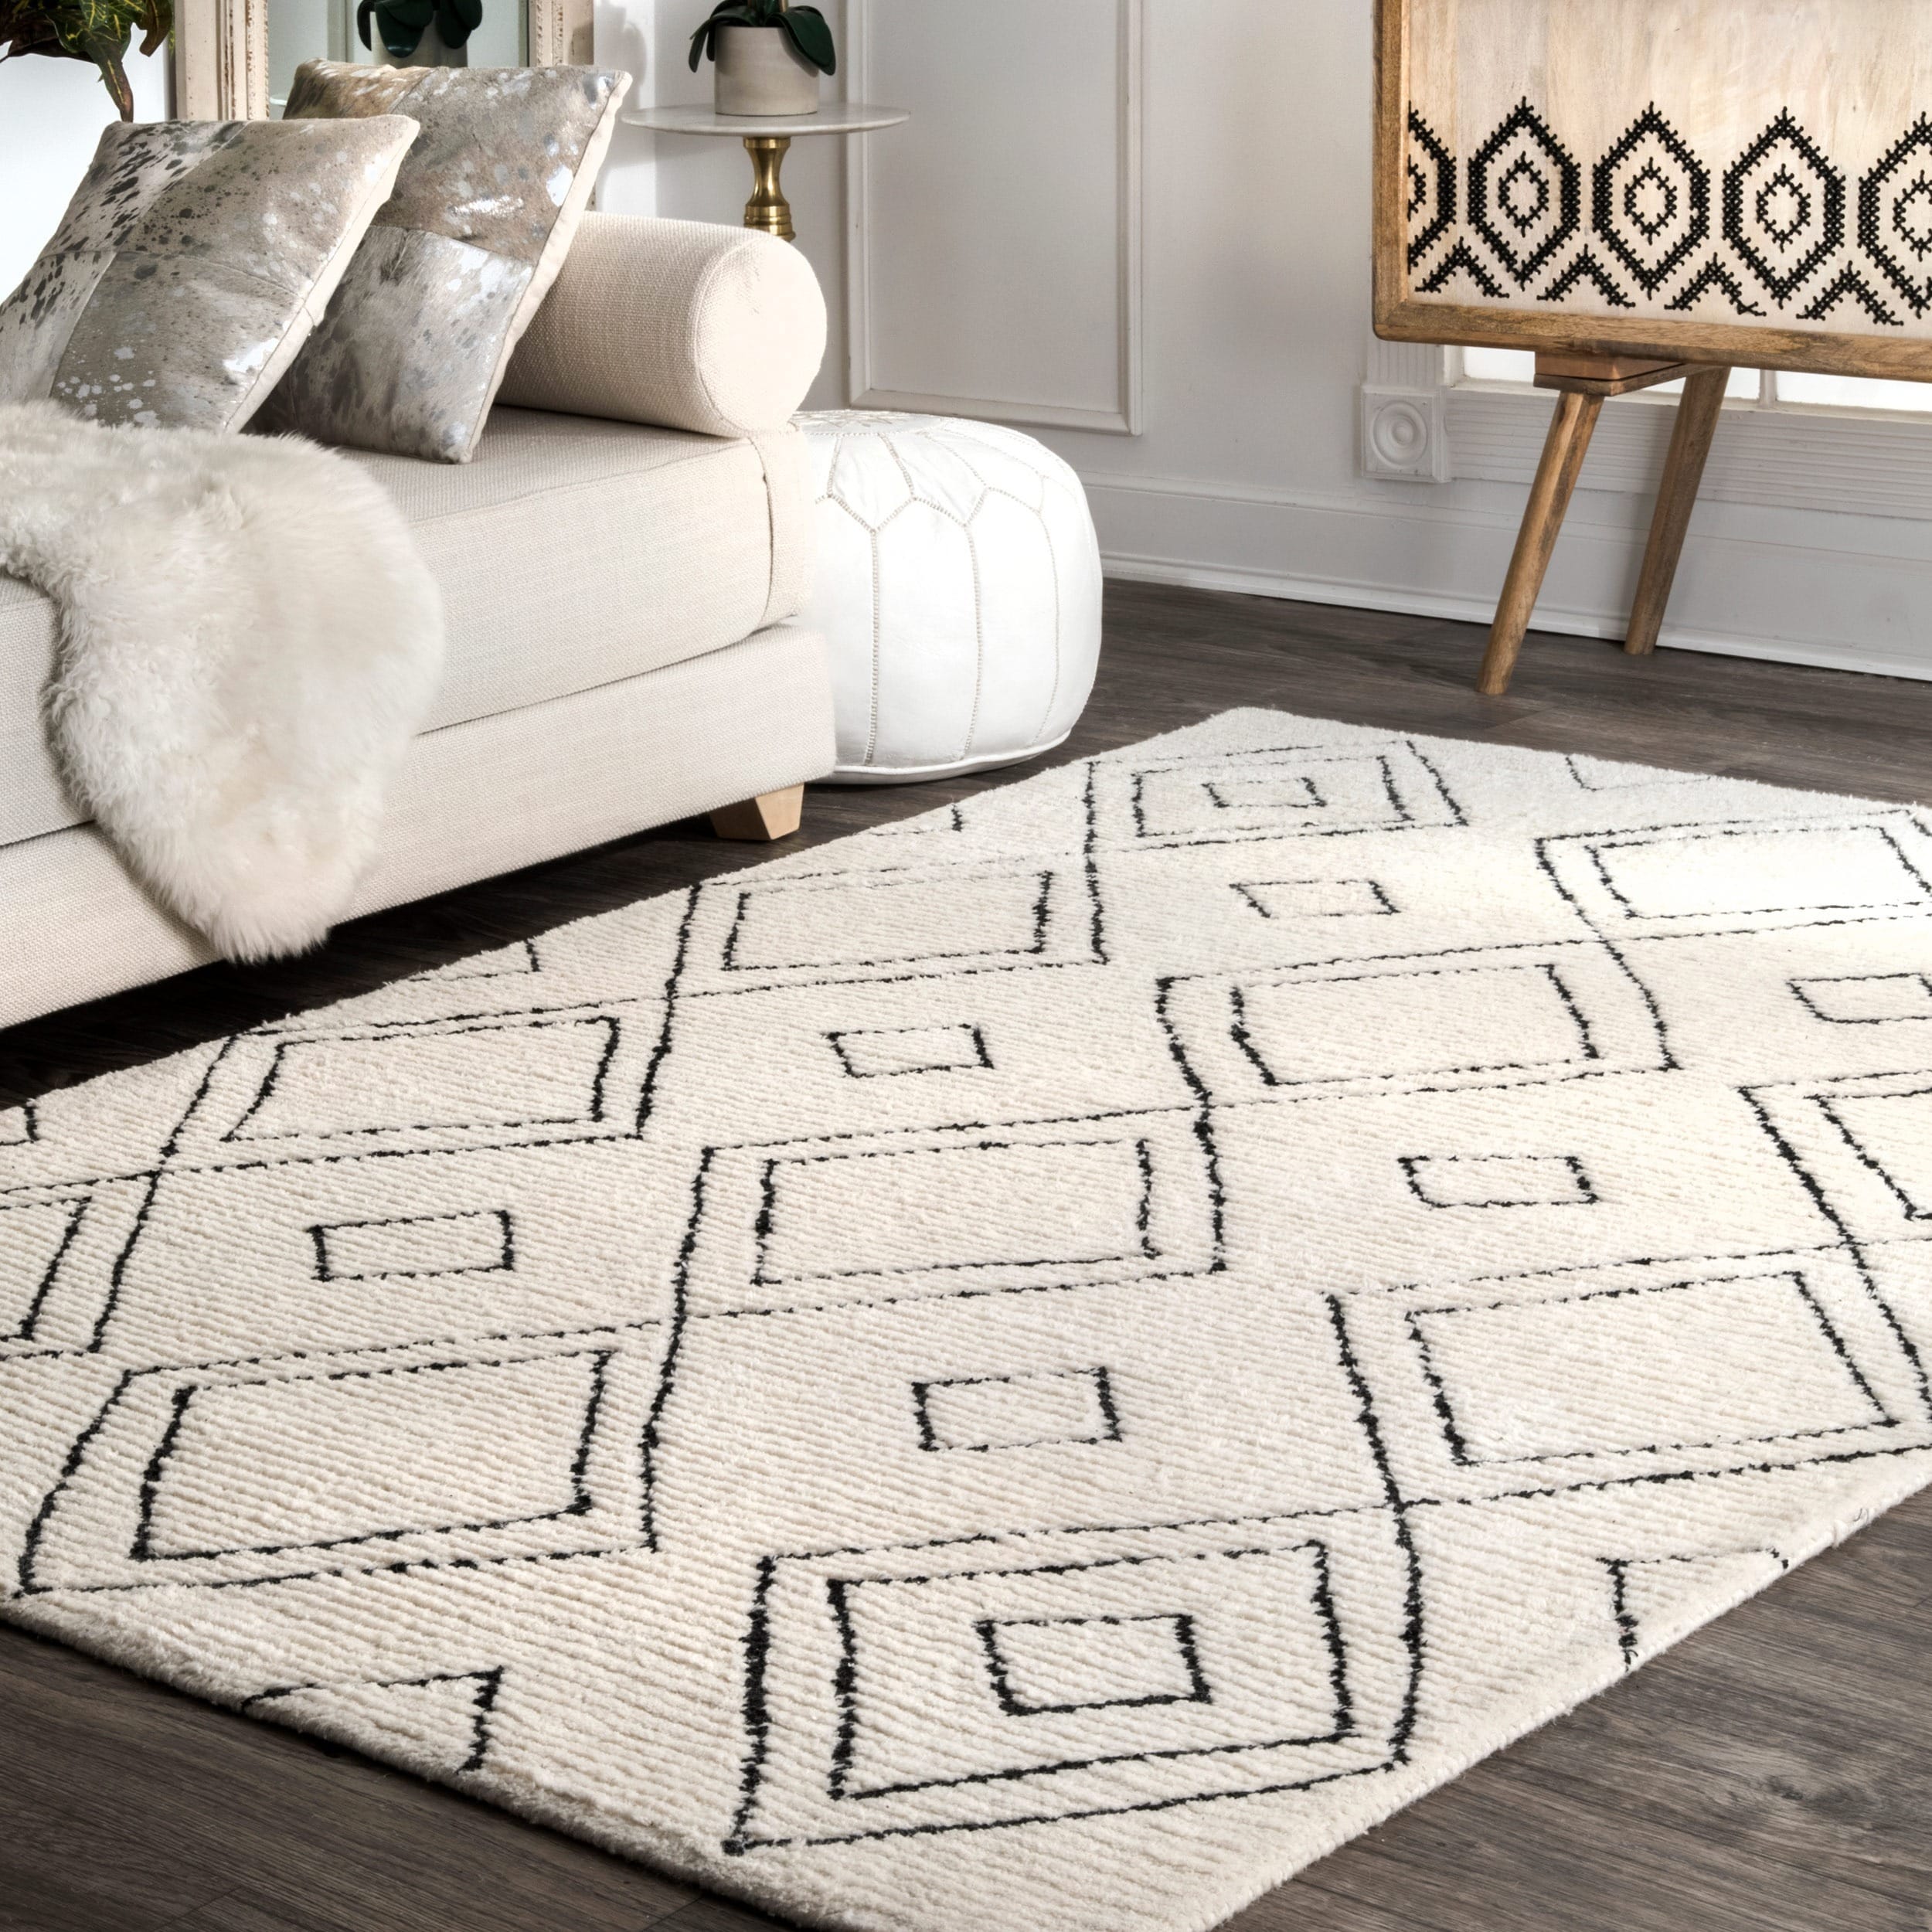 Black And White Rug With Diamond Design With Tassels Modern House Modern House